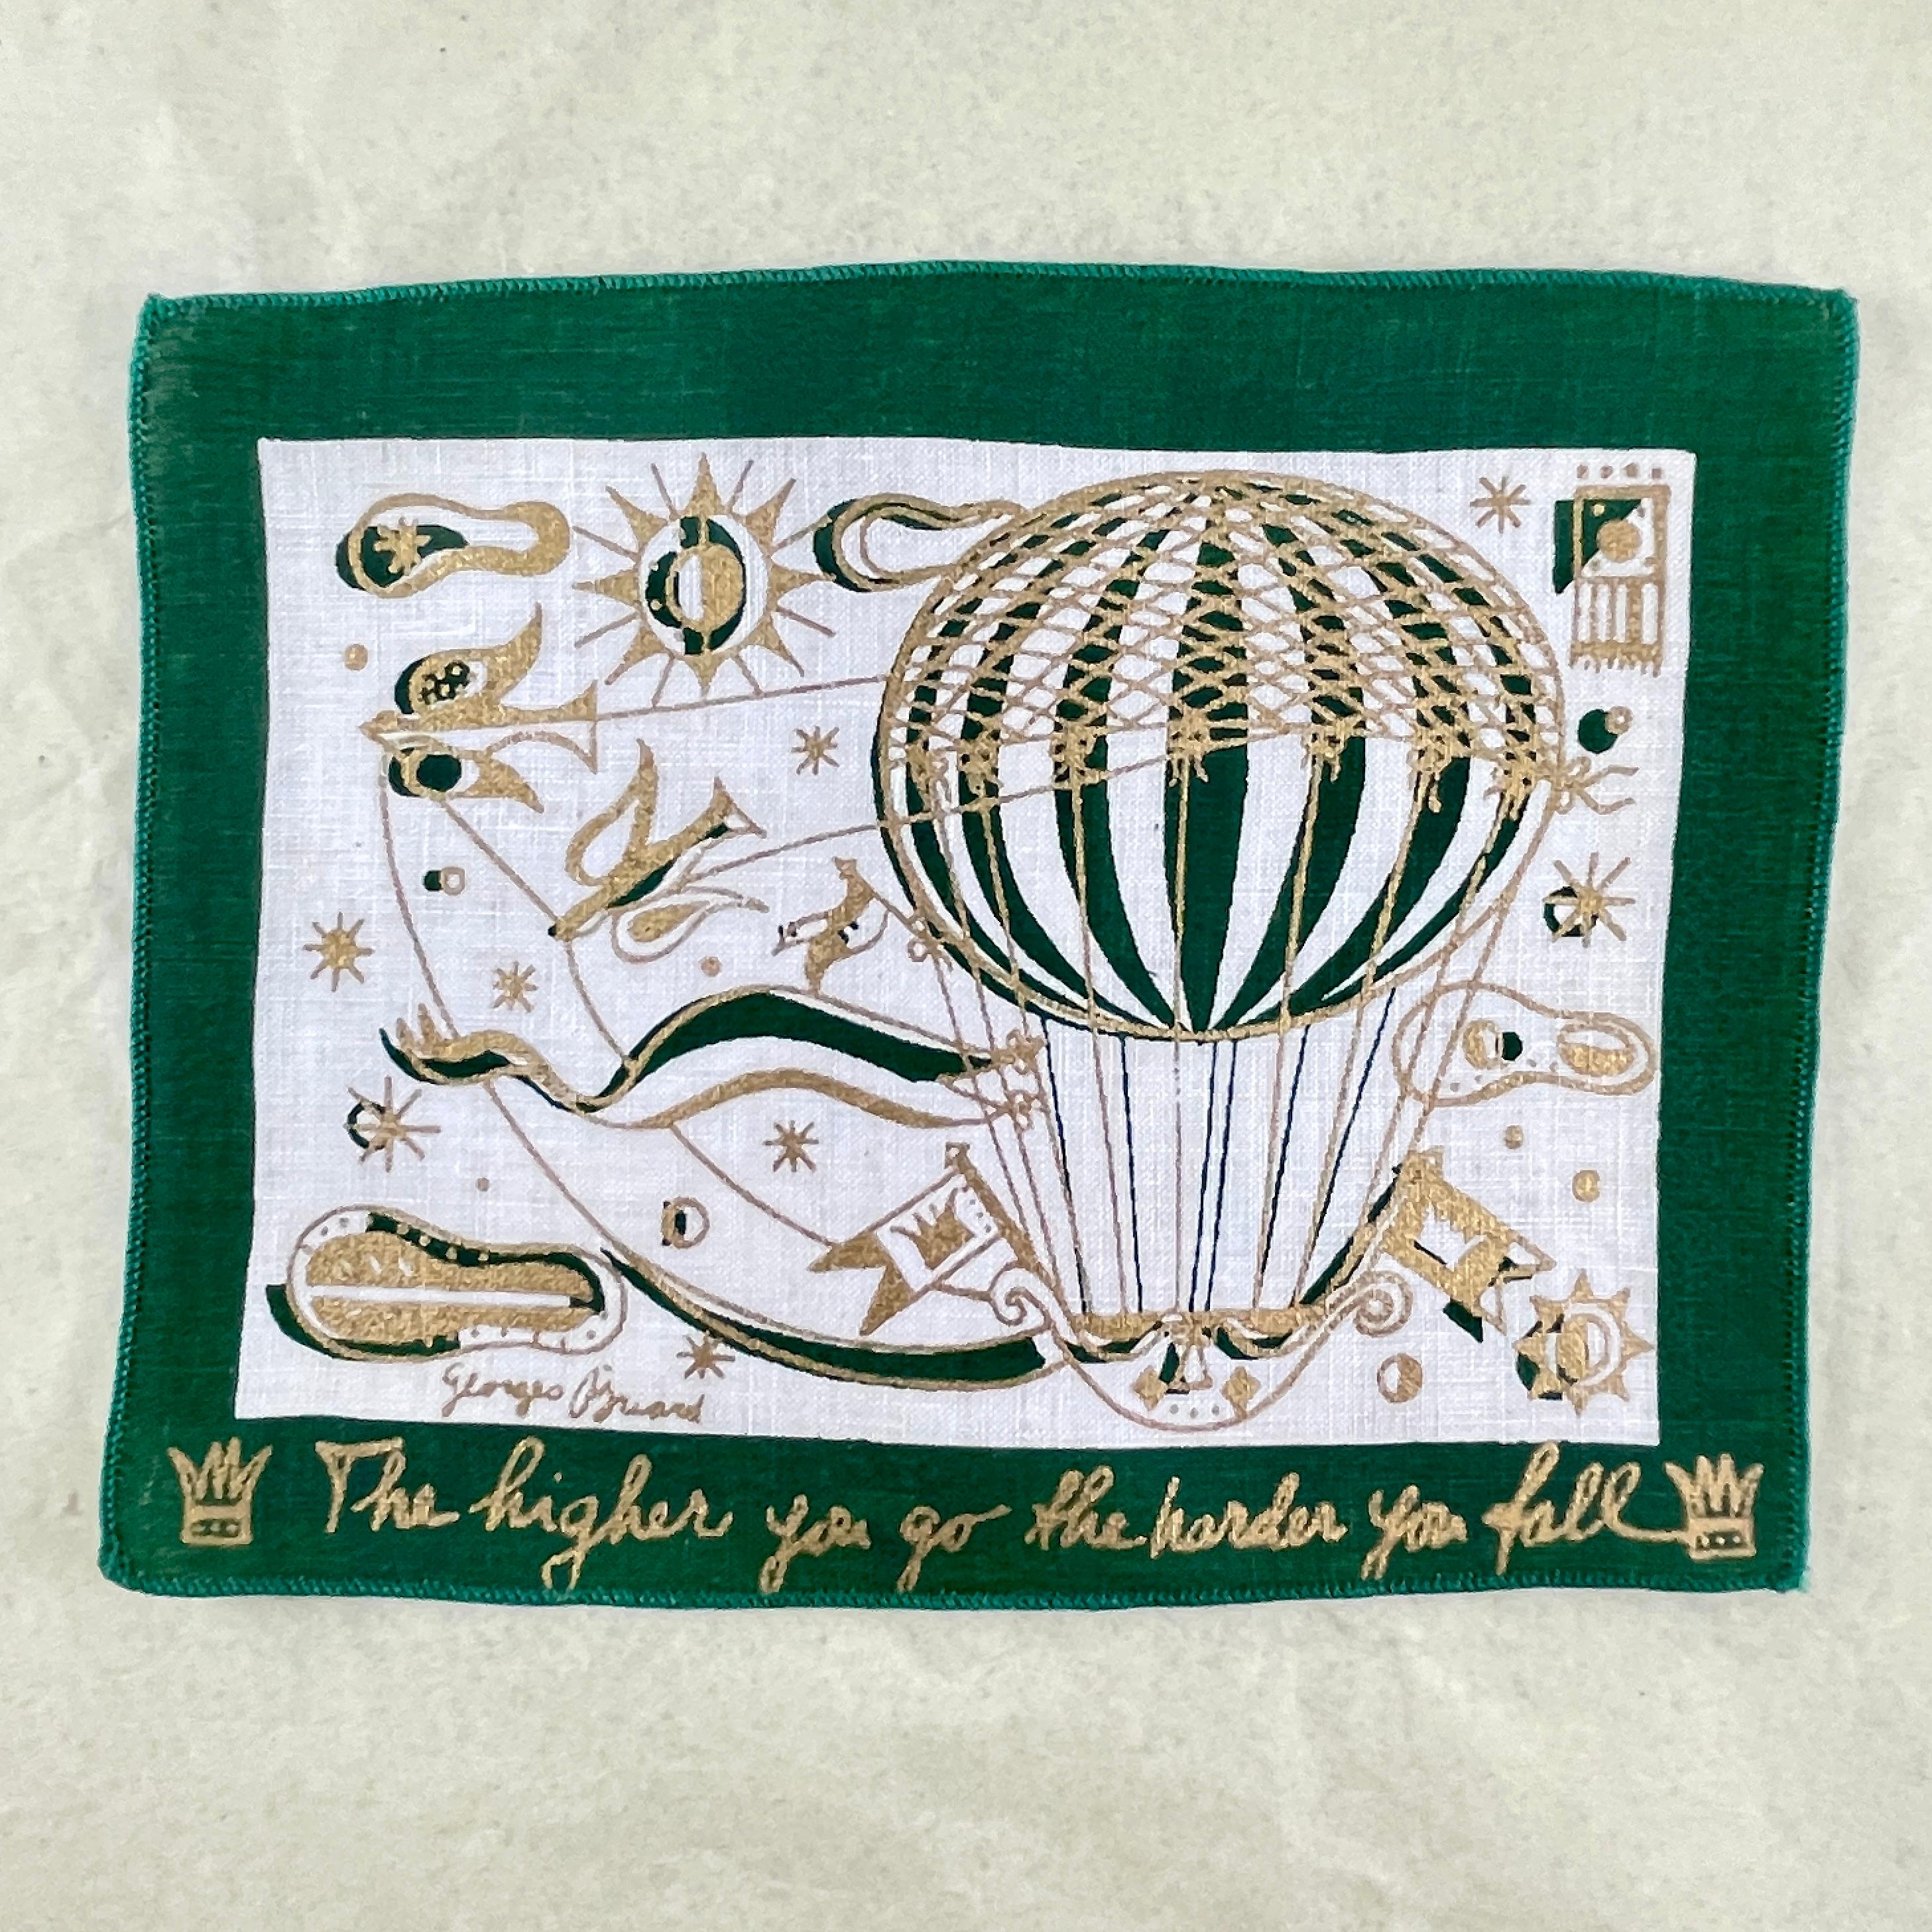 American George Briard Cocktail Napkins -The Higher You Go The Harder You Fall, S/8 Boxed For Sale